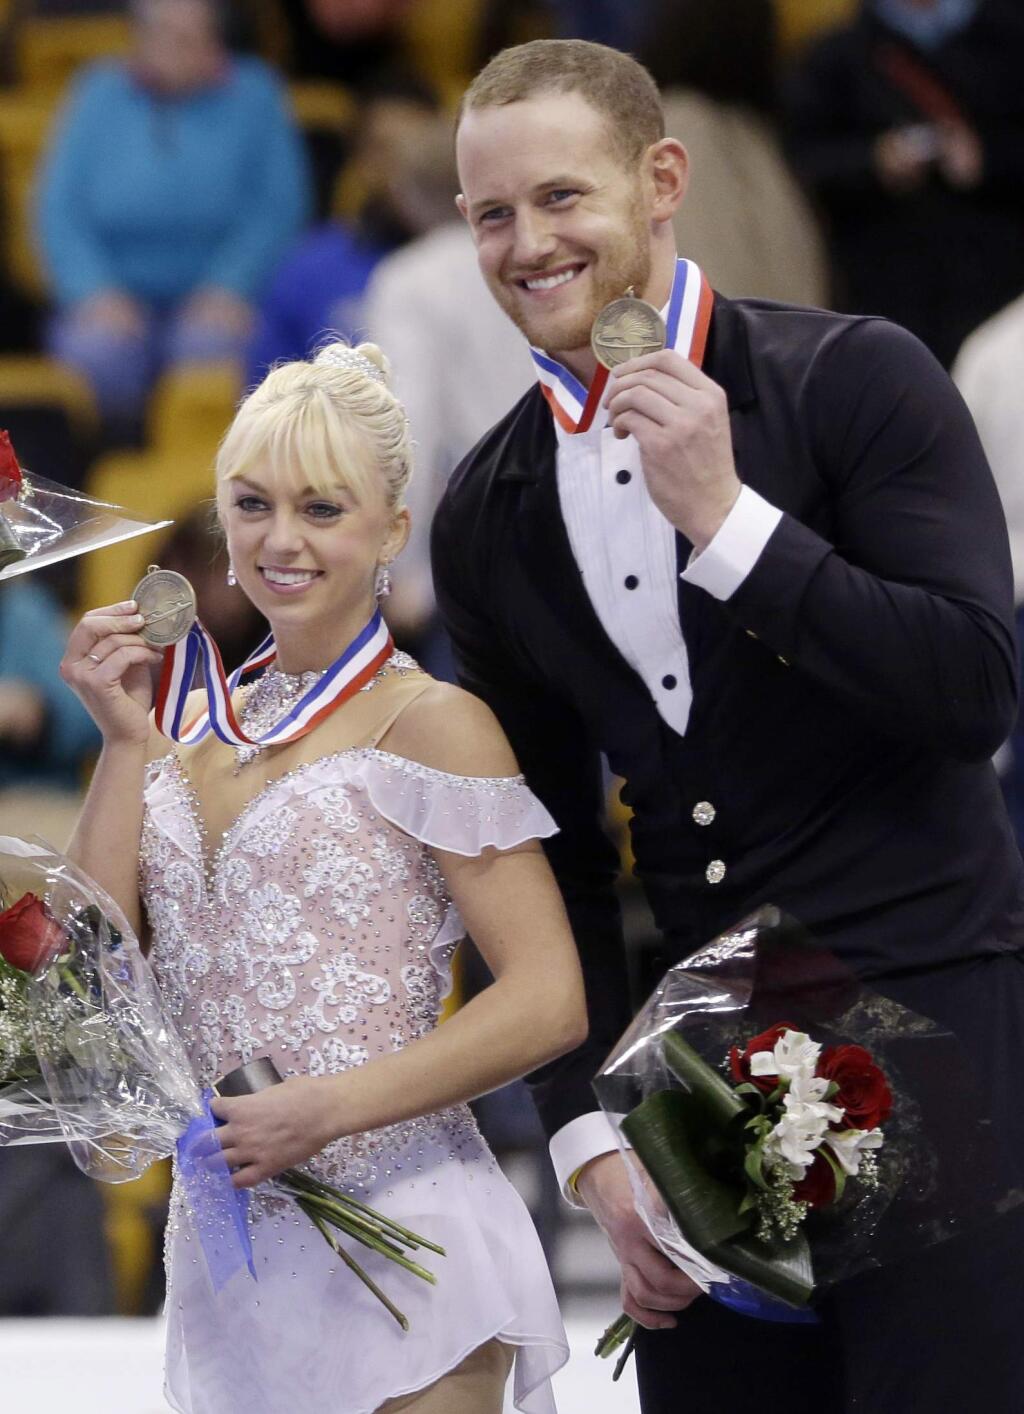 FILE - In this Jan. 11, 2014, file photo, bronze medalists Caydee Denney and John Coughlin, of the United States, smile during an award ceremony at the U.S. Figure Skating Championships in Boston. Coughlin, a two-time U.S. pairs champion recently suspended from figure skating, has died. He was 33. U.S. Figure Skating released a statement Saturday, Jan. 19, 2019, and cited his sister, Angela Laune. The sister said in a Facebook post that her 'wonderful, strong, amazingly compassionate brother John Coughlin took his own life. ... I have no words.' There were no further details. (AP Photo/Steven Senne, File)